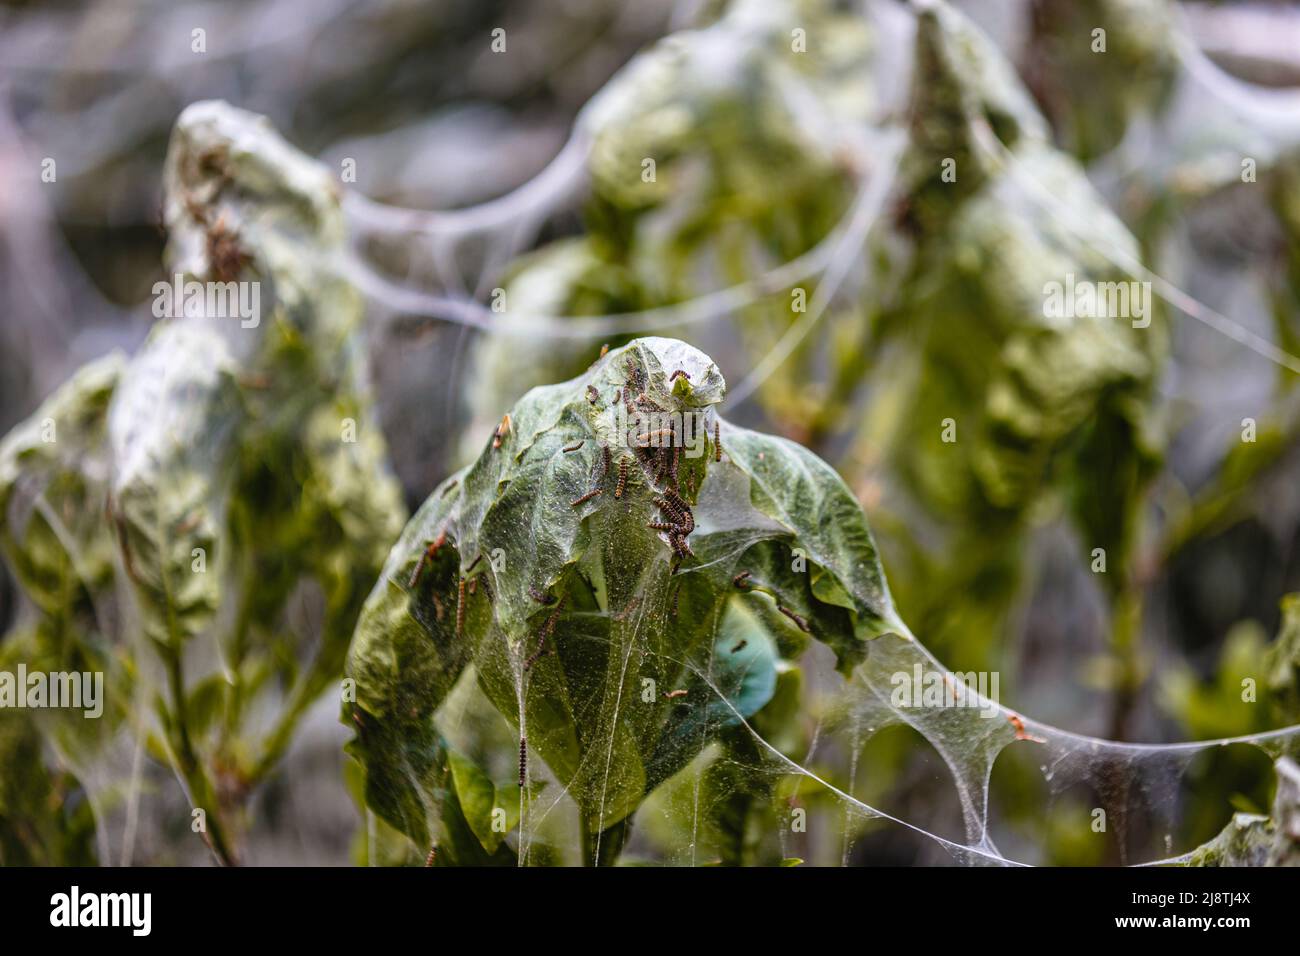 A spindle ermine web covers plants in St. James' park iin London providing protection from birds and other animals. Stock Photo